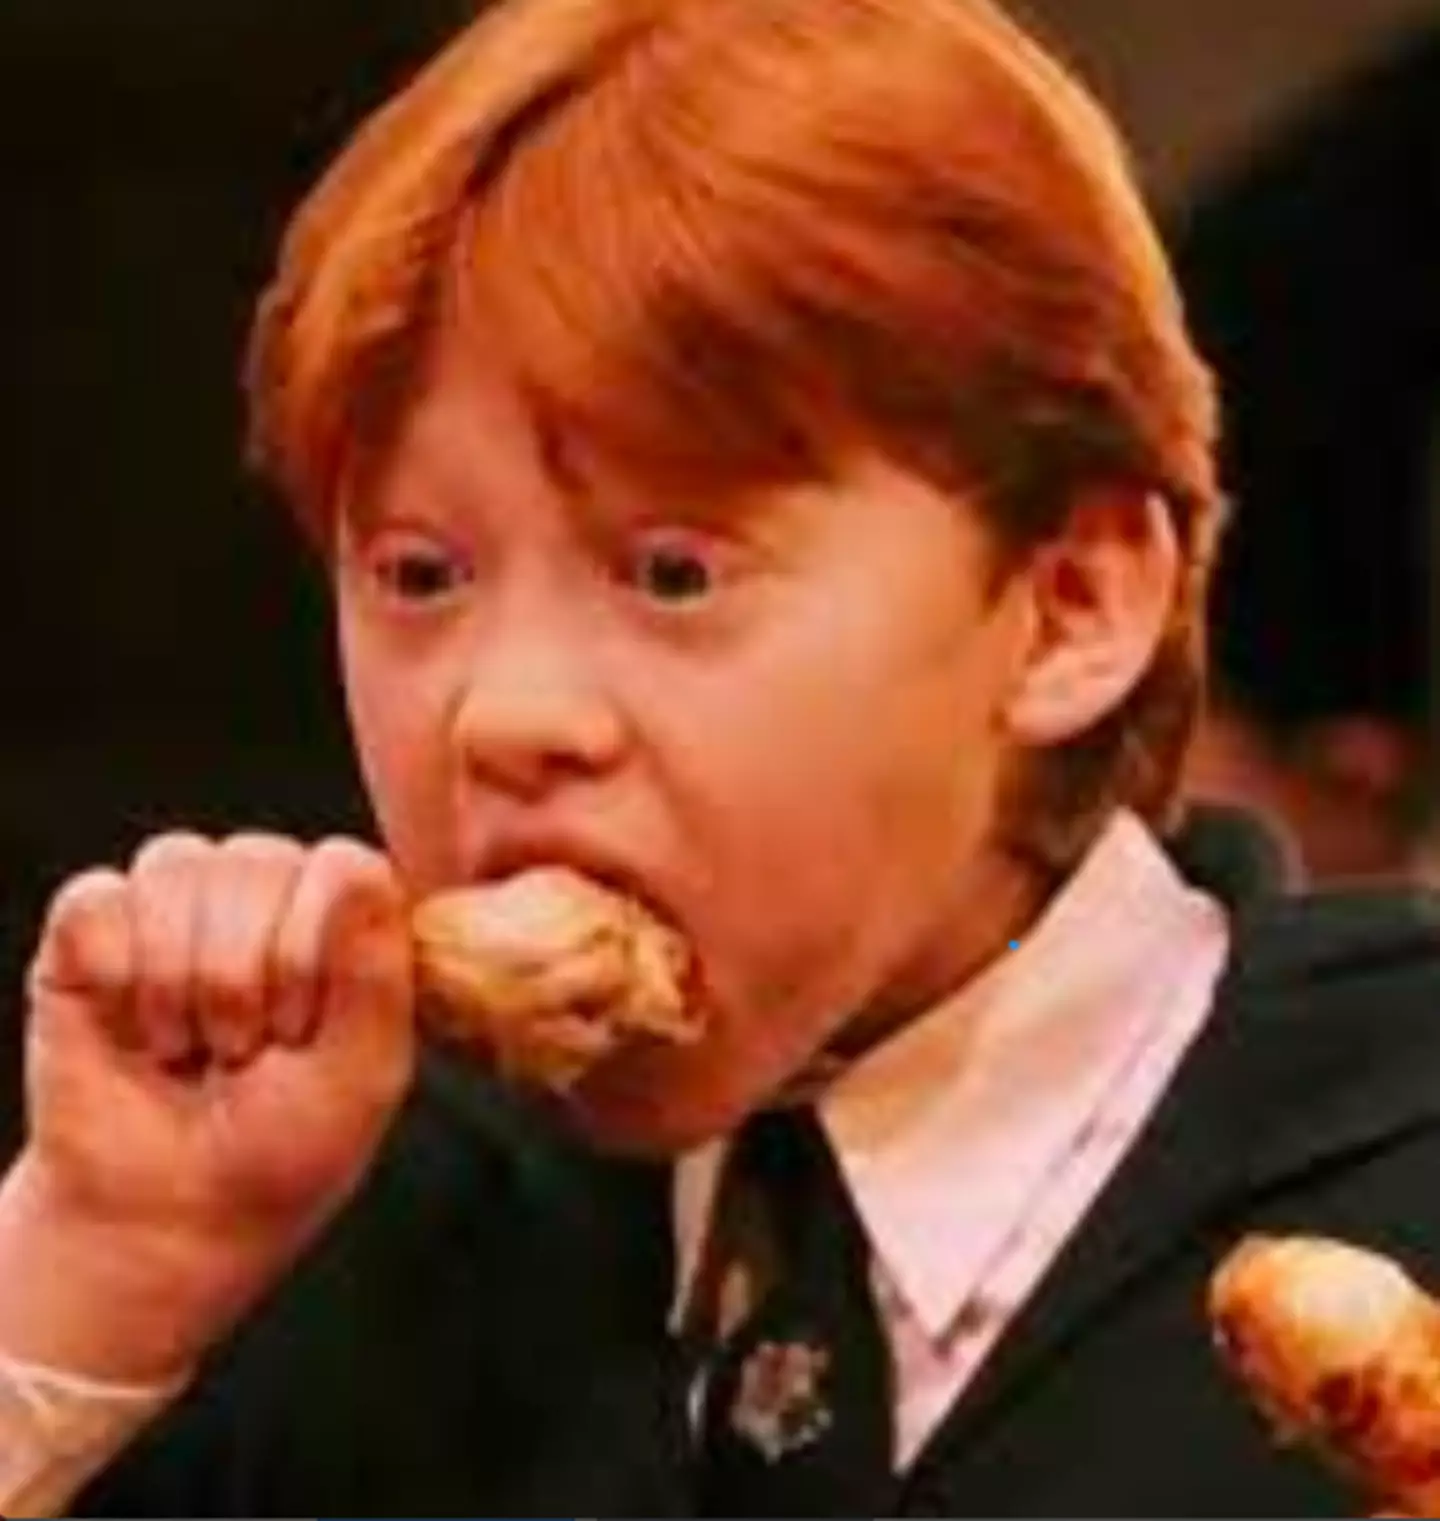 The Harry Potter actors were warned not to eat the fake food on the table.